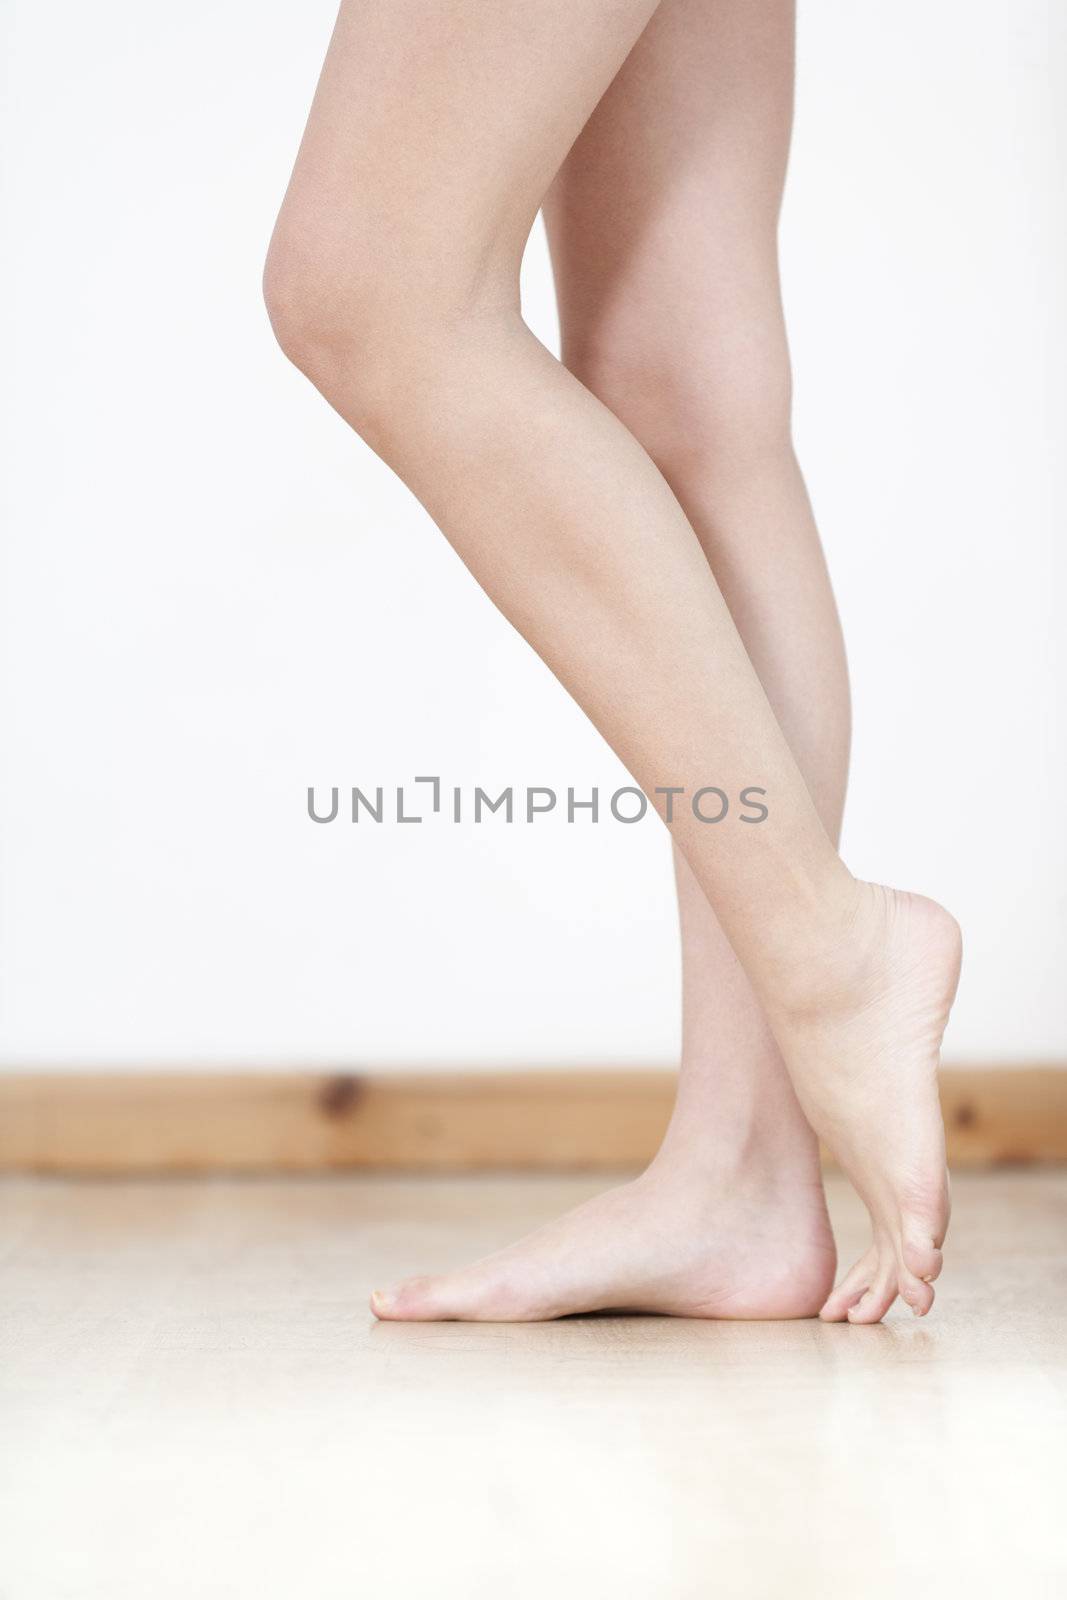 Womans legs on wooden floor against a white wall back drop.